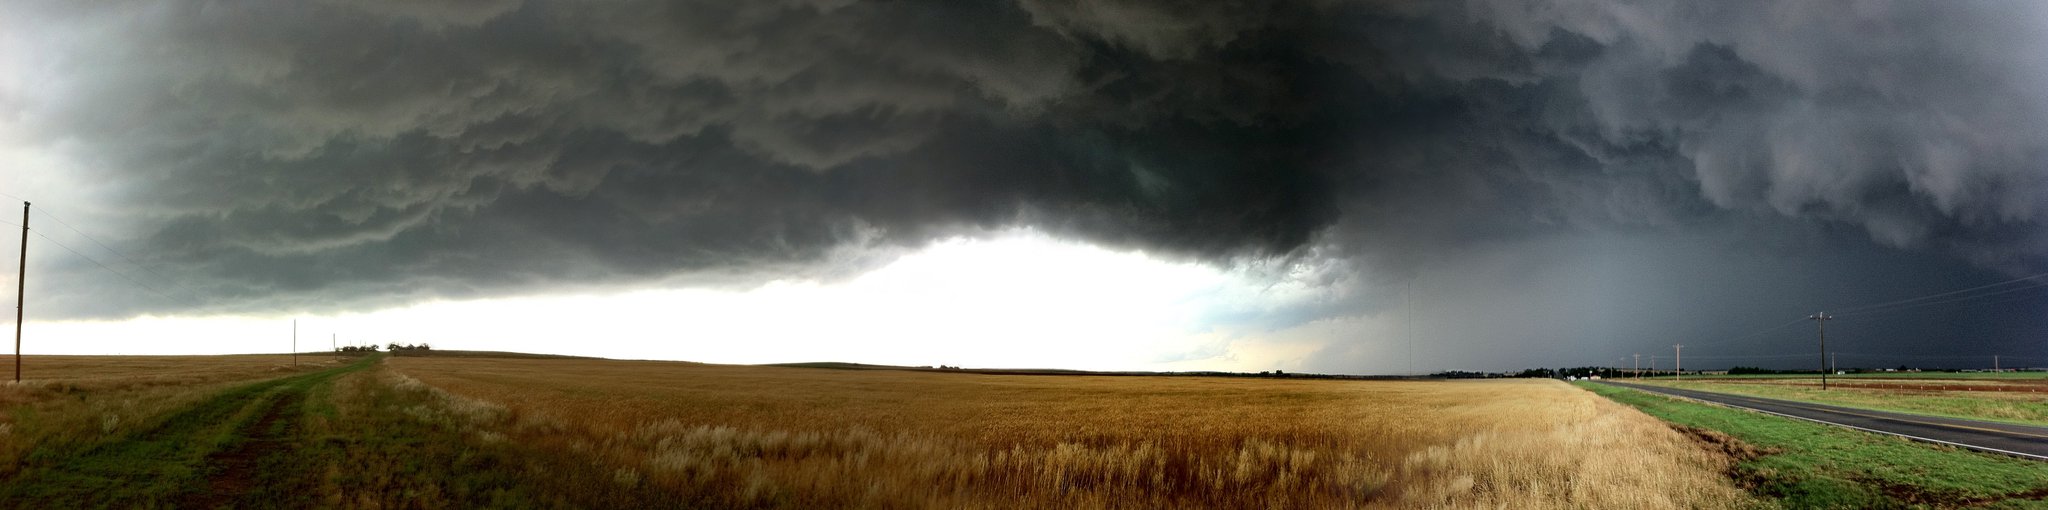 Supercell in Eckly, Oklahoma